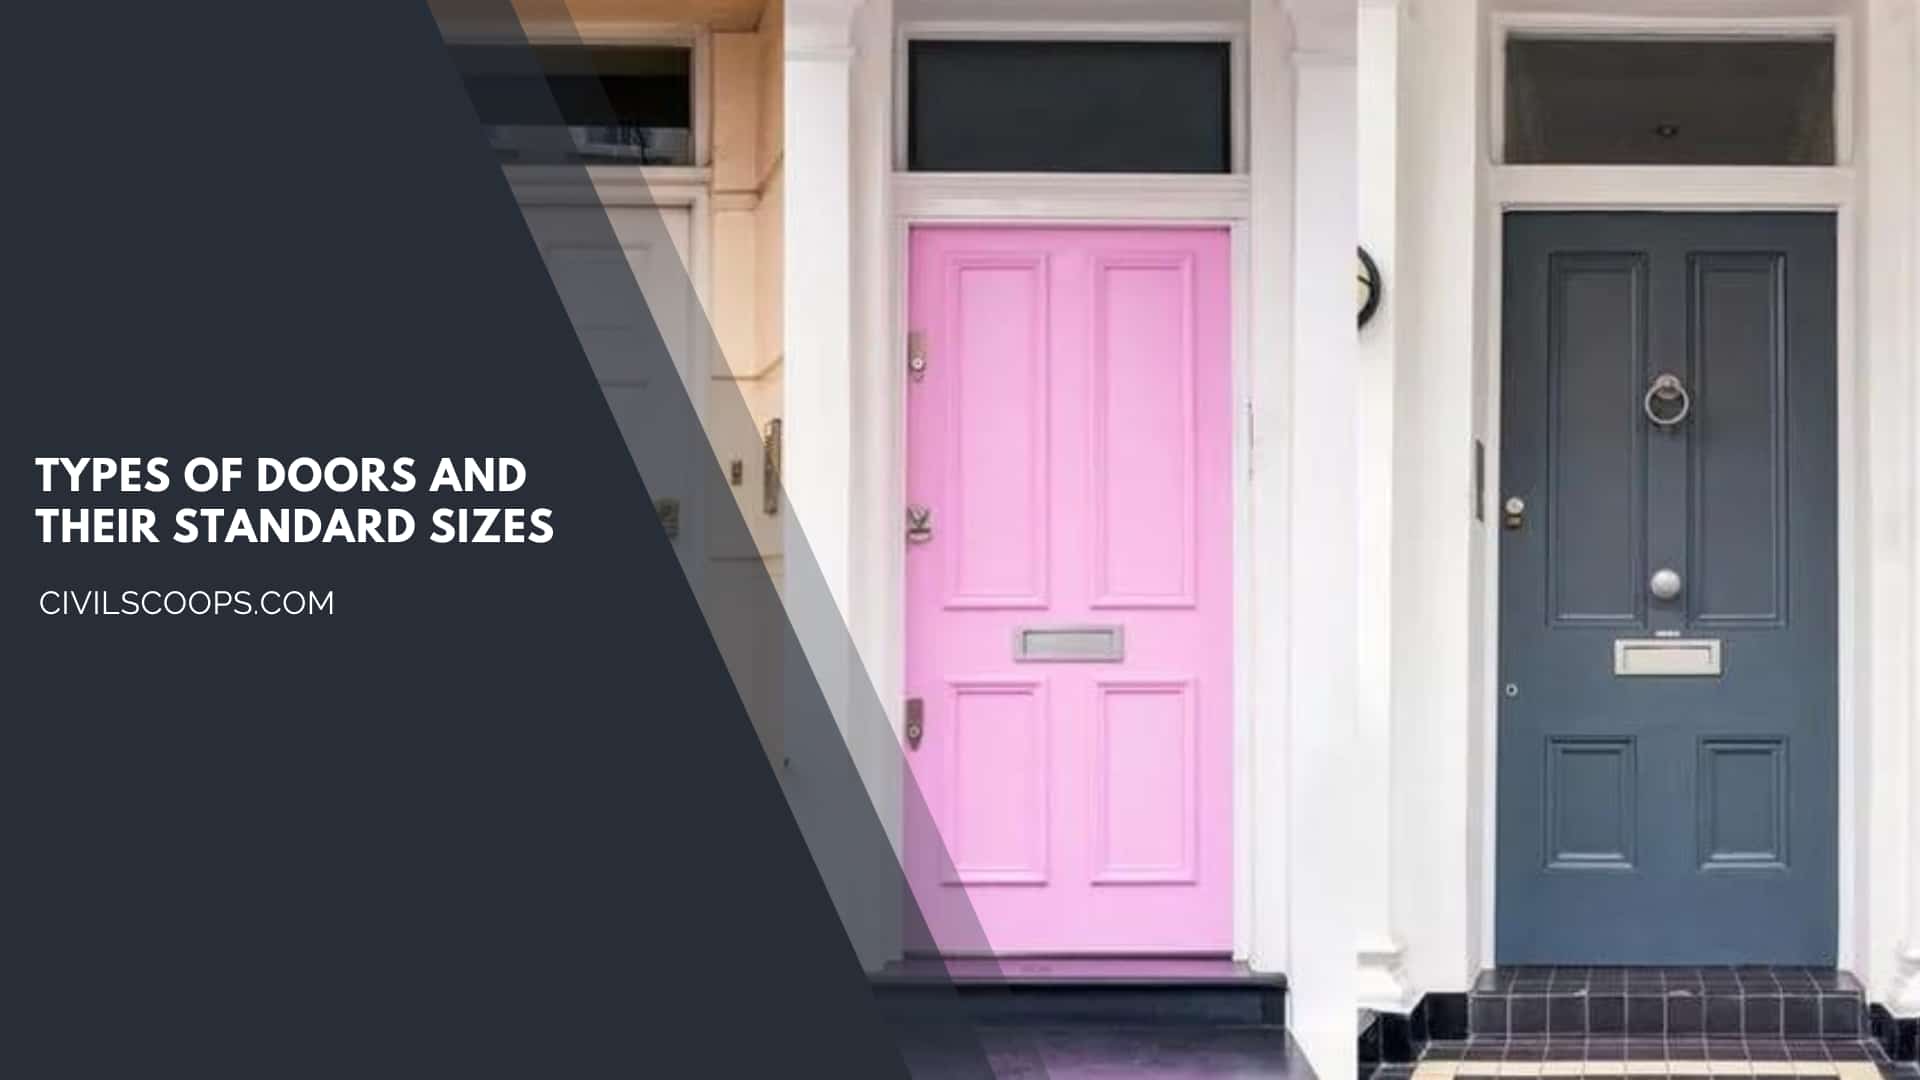 Types of Doors and Their Standard Sizes